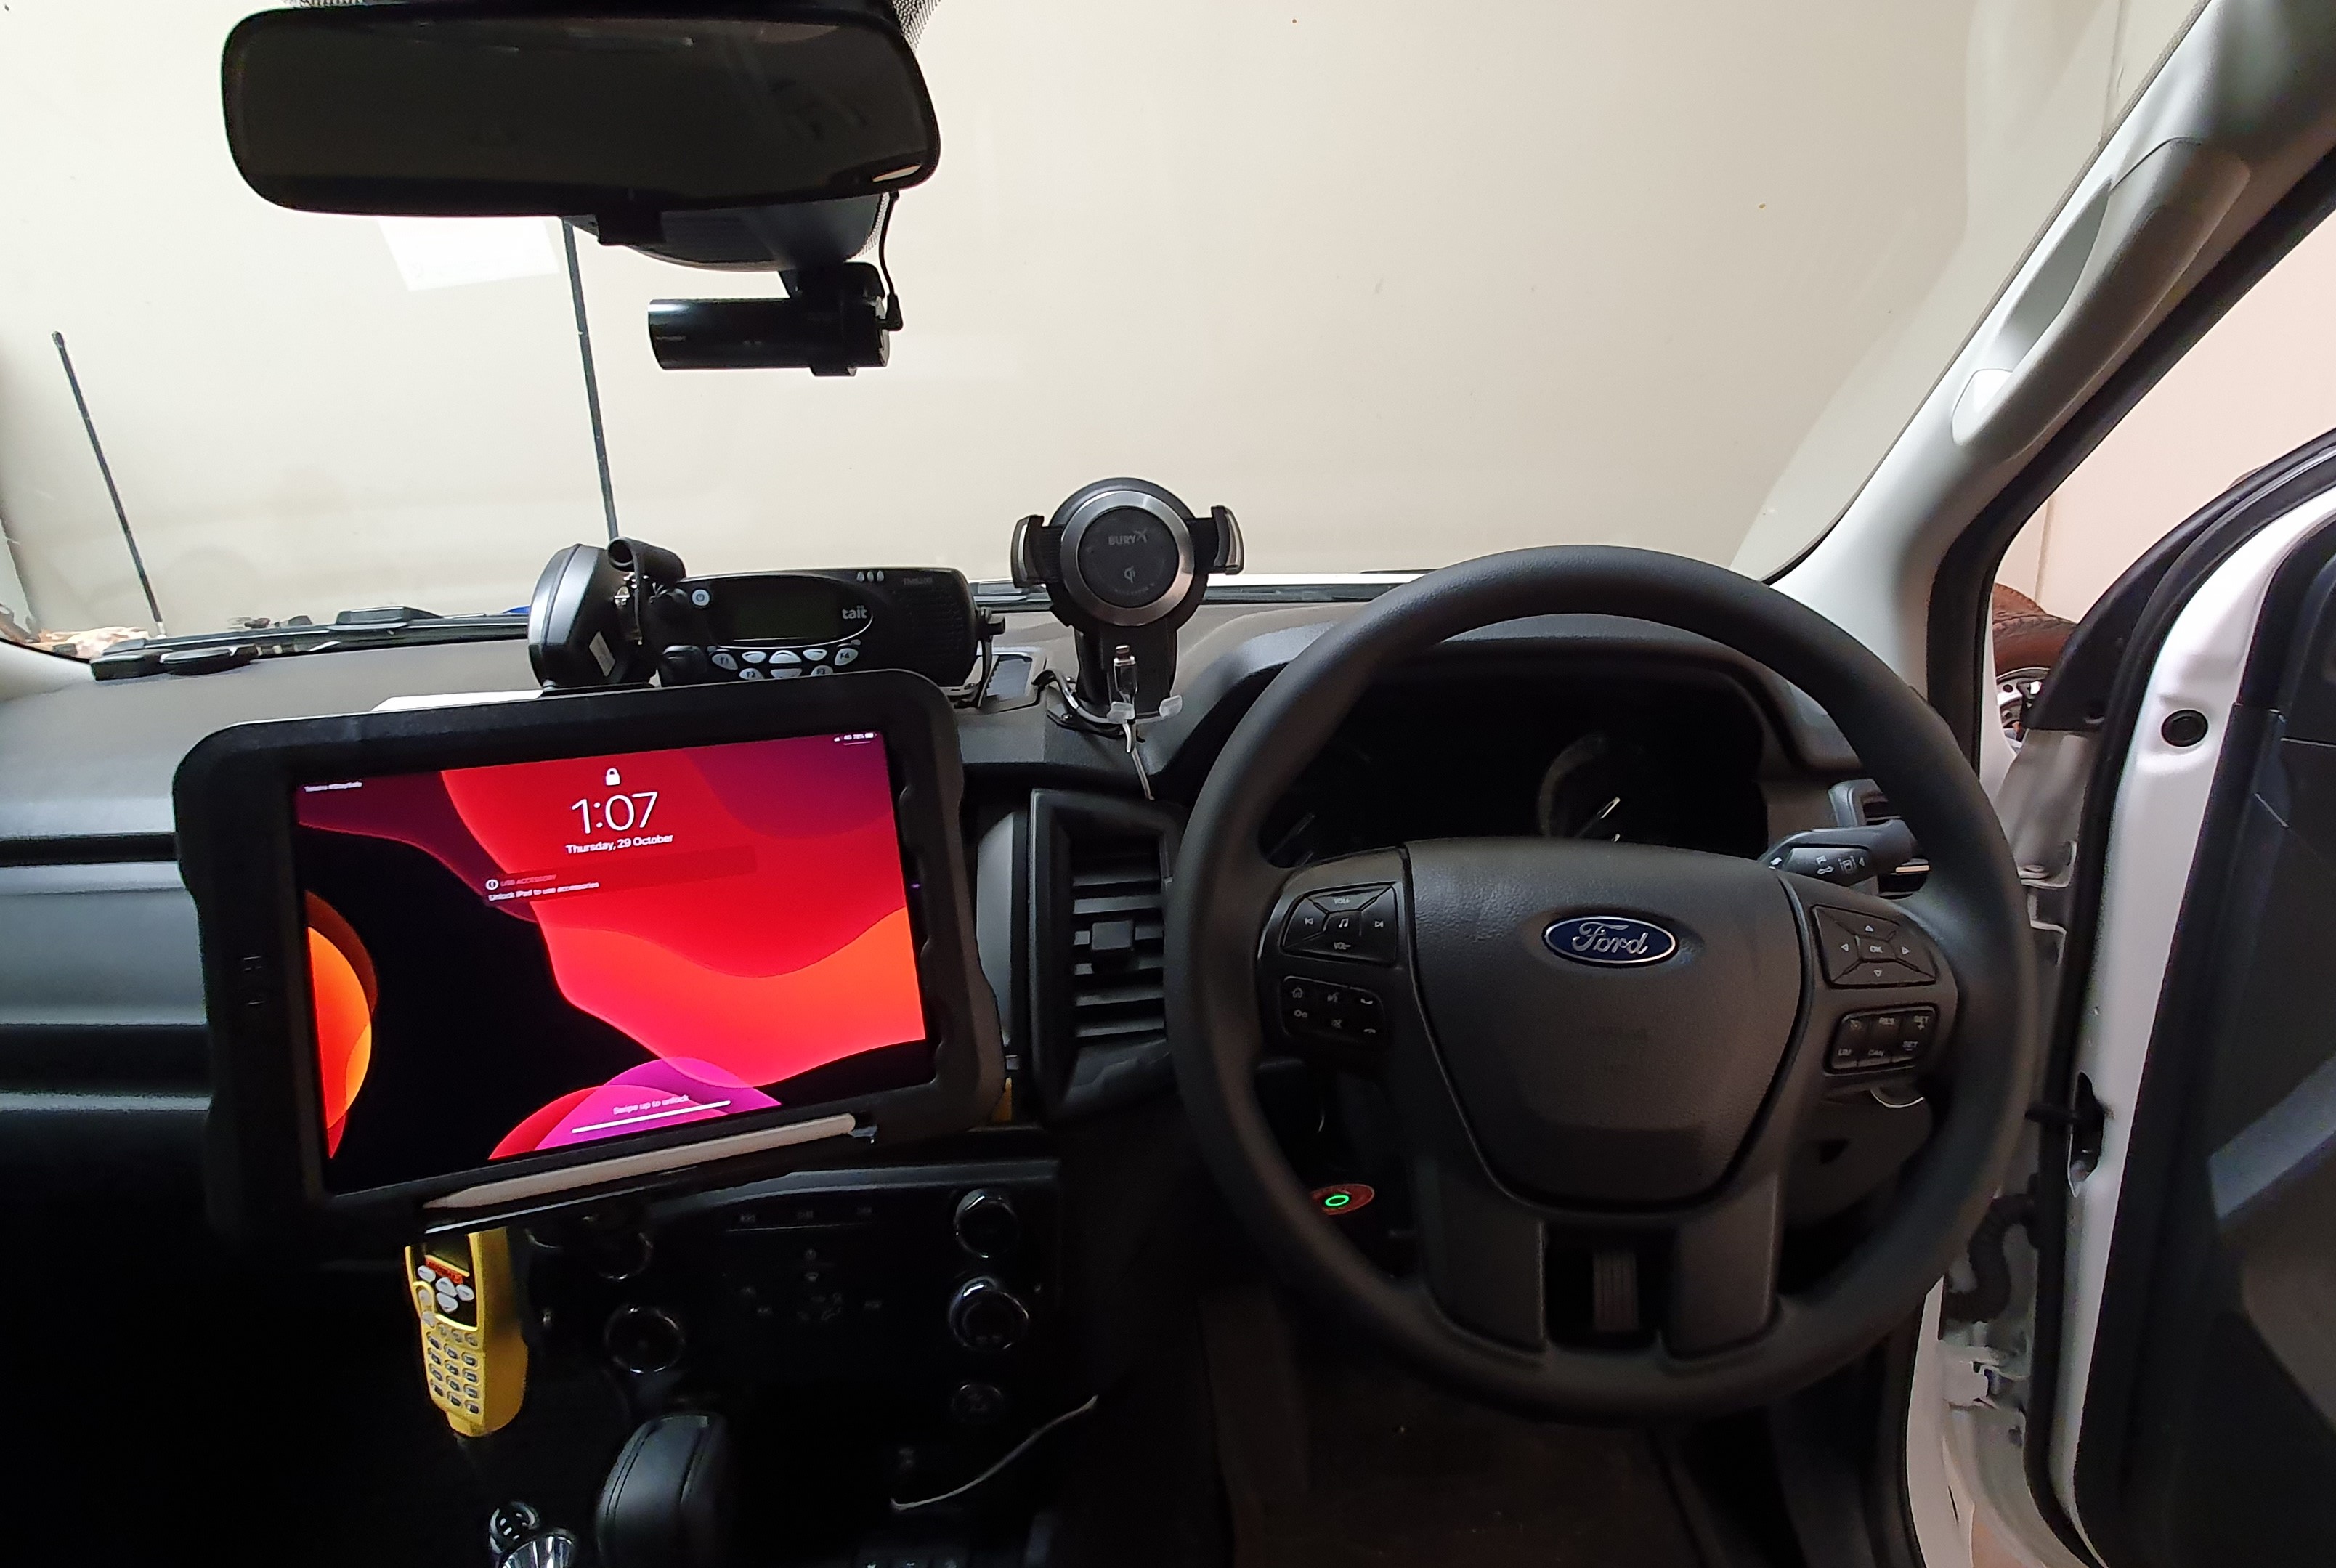 The Apple iPad installed in a dash mounting kit for a Ford Ranger